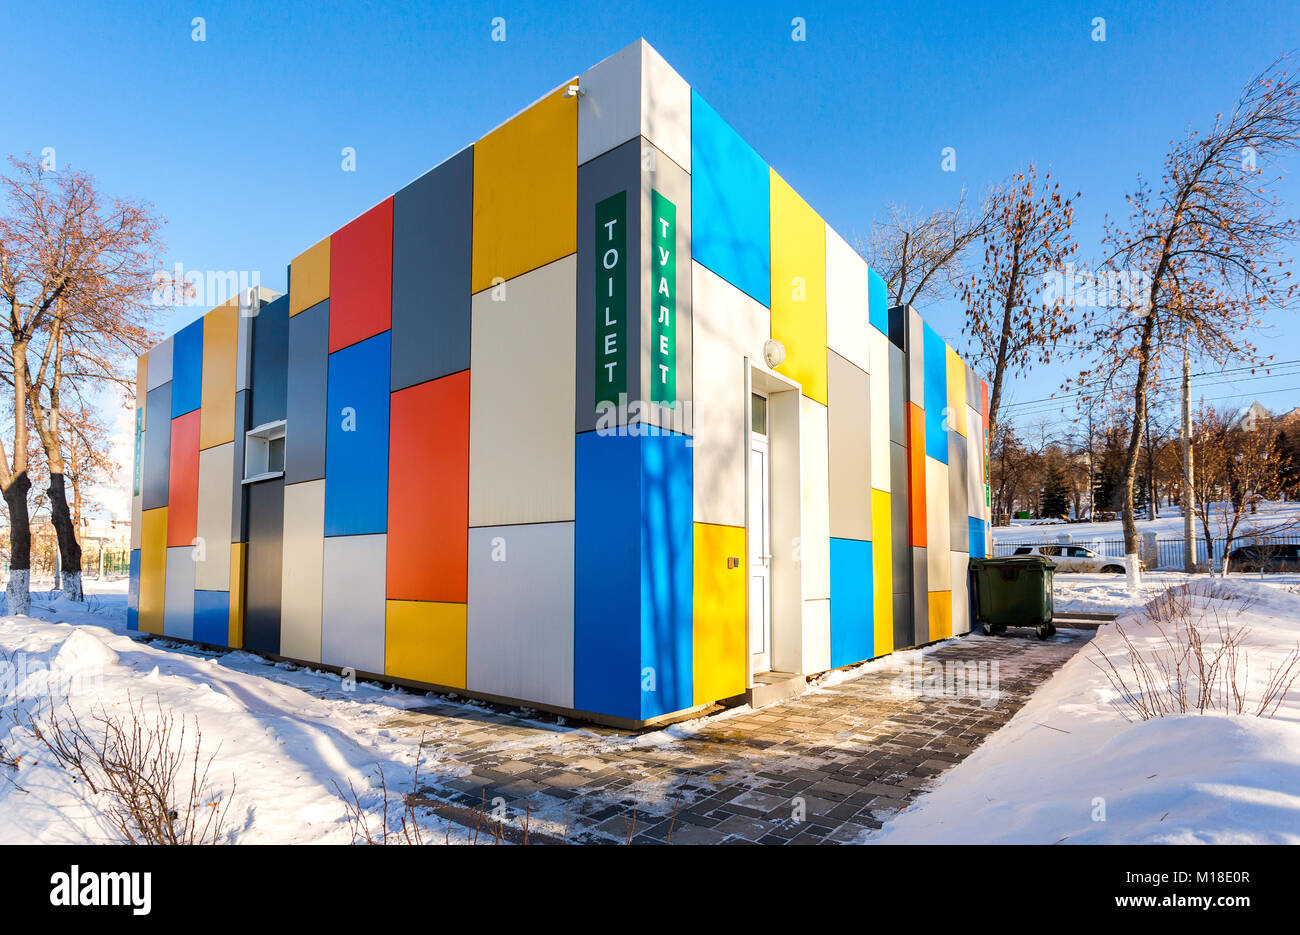 Samara, Russia - January 27, 2018: Vibrant colorful public toilet at the city embankment in winter sunny day. Text in russian: Toilet Stock Photo